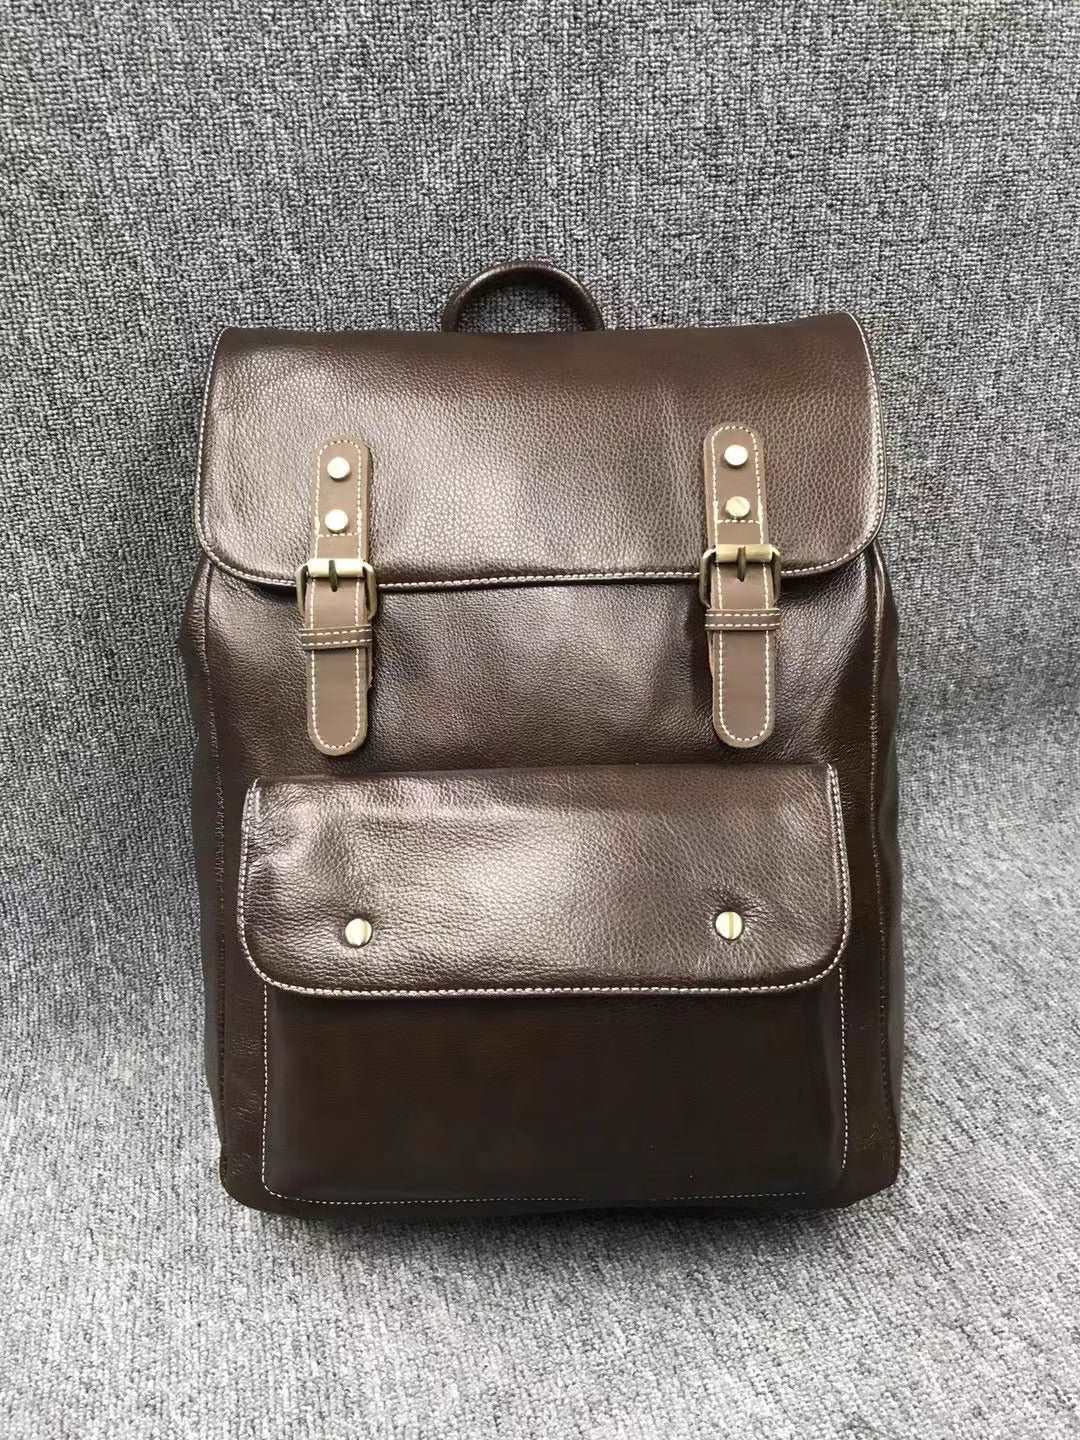 Classic Leather Backpack for Men with Computer Compartment woyaza